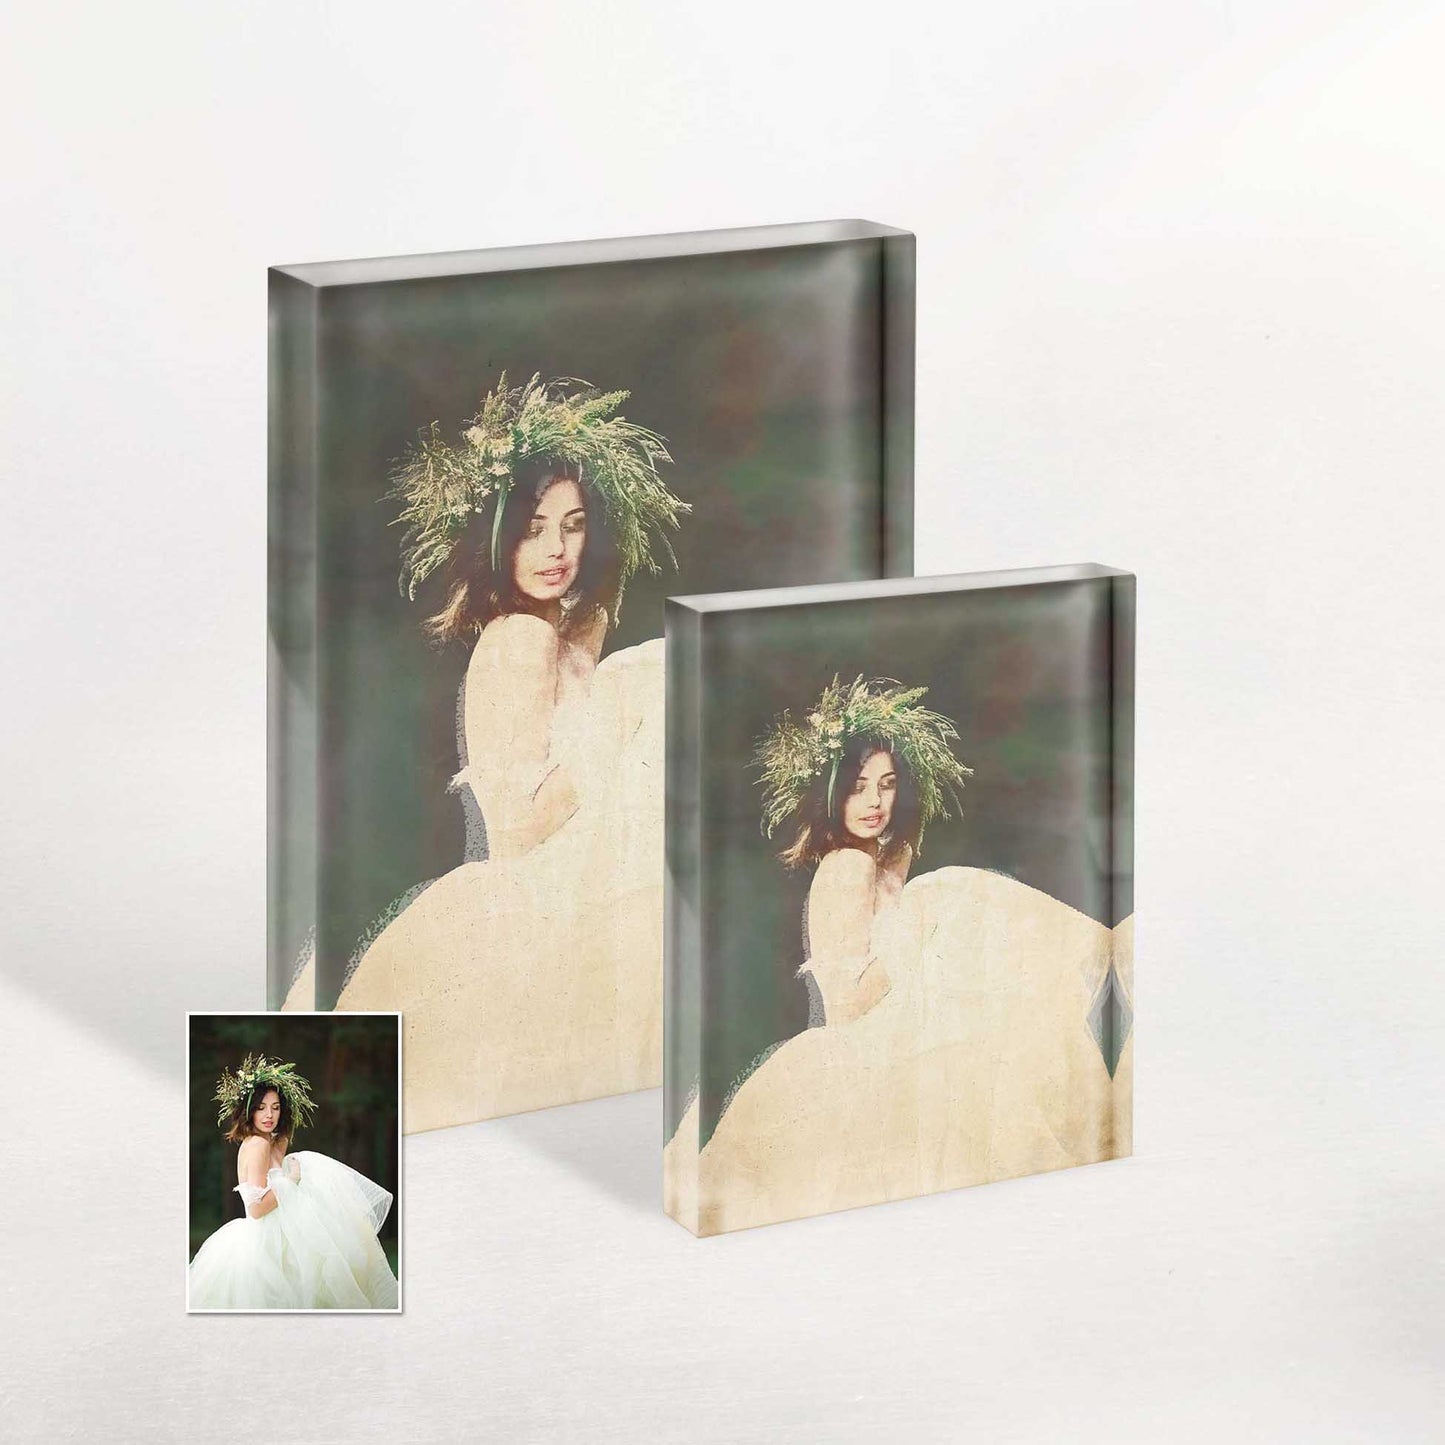 Infuse your home with a touch of old-world charm using the Personalised Vintage Gouache Acrylic Block Photo. Its artistic beauty, reminiscent of classic gouache paintings, brings a sense of elegance and nostalgia